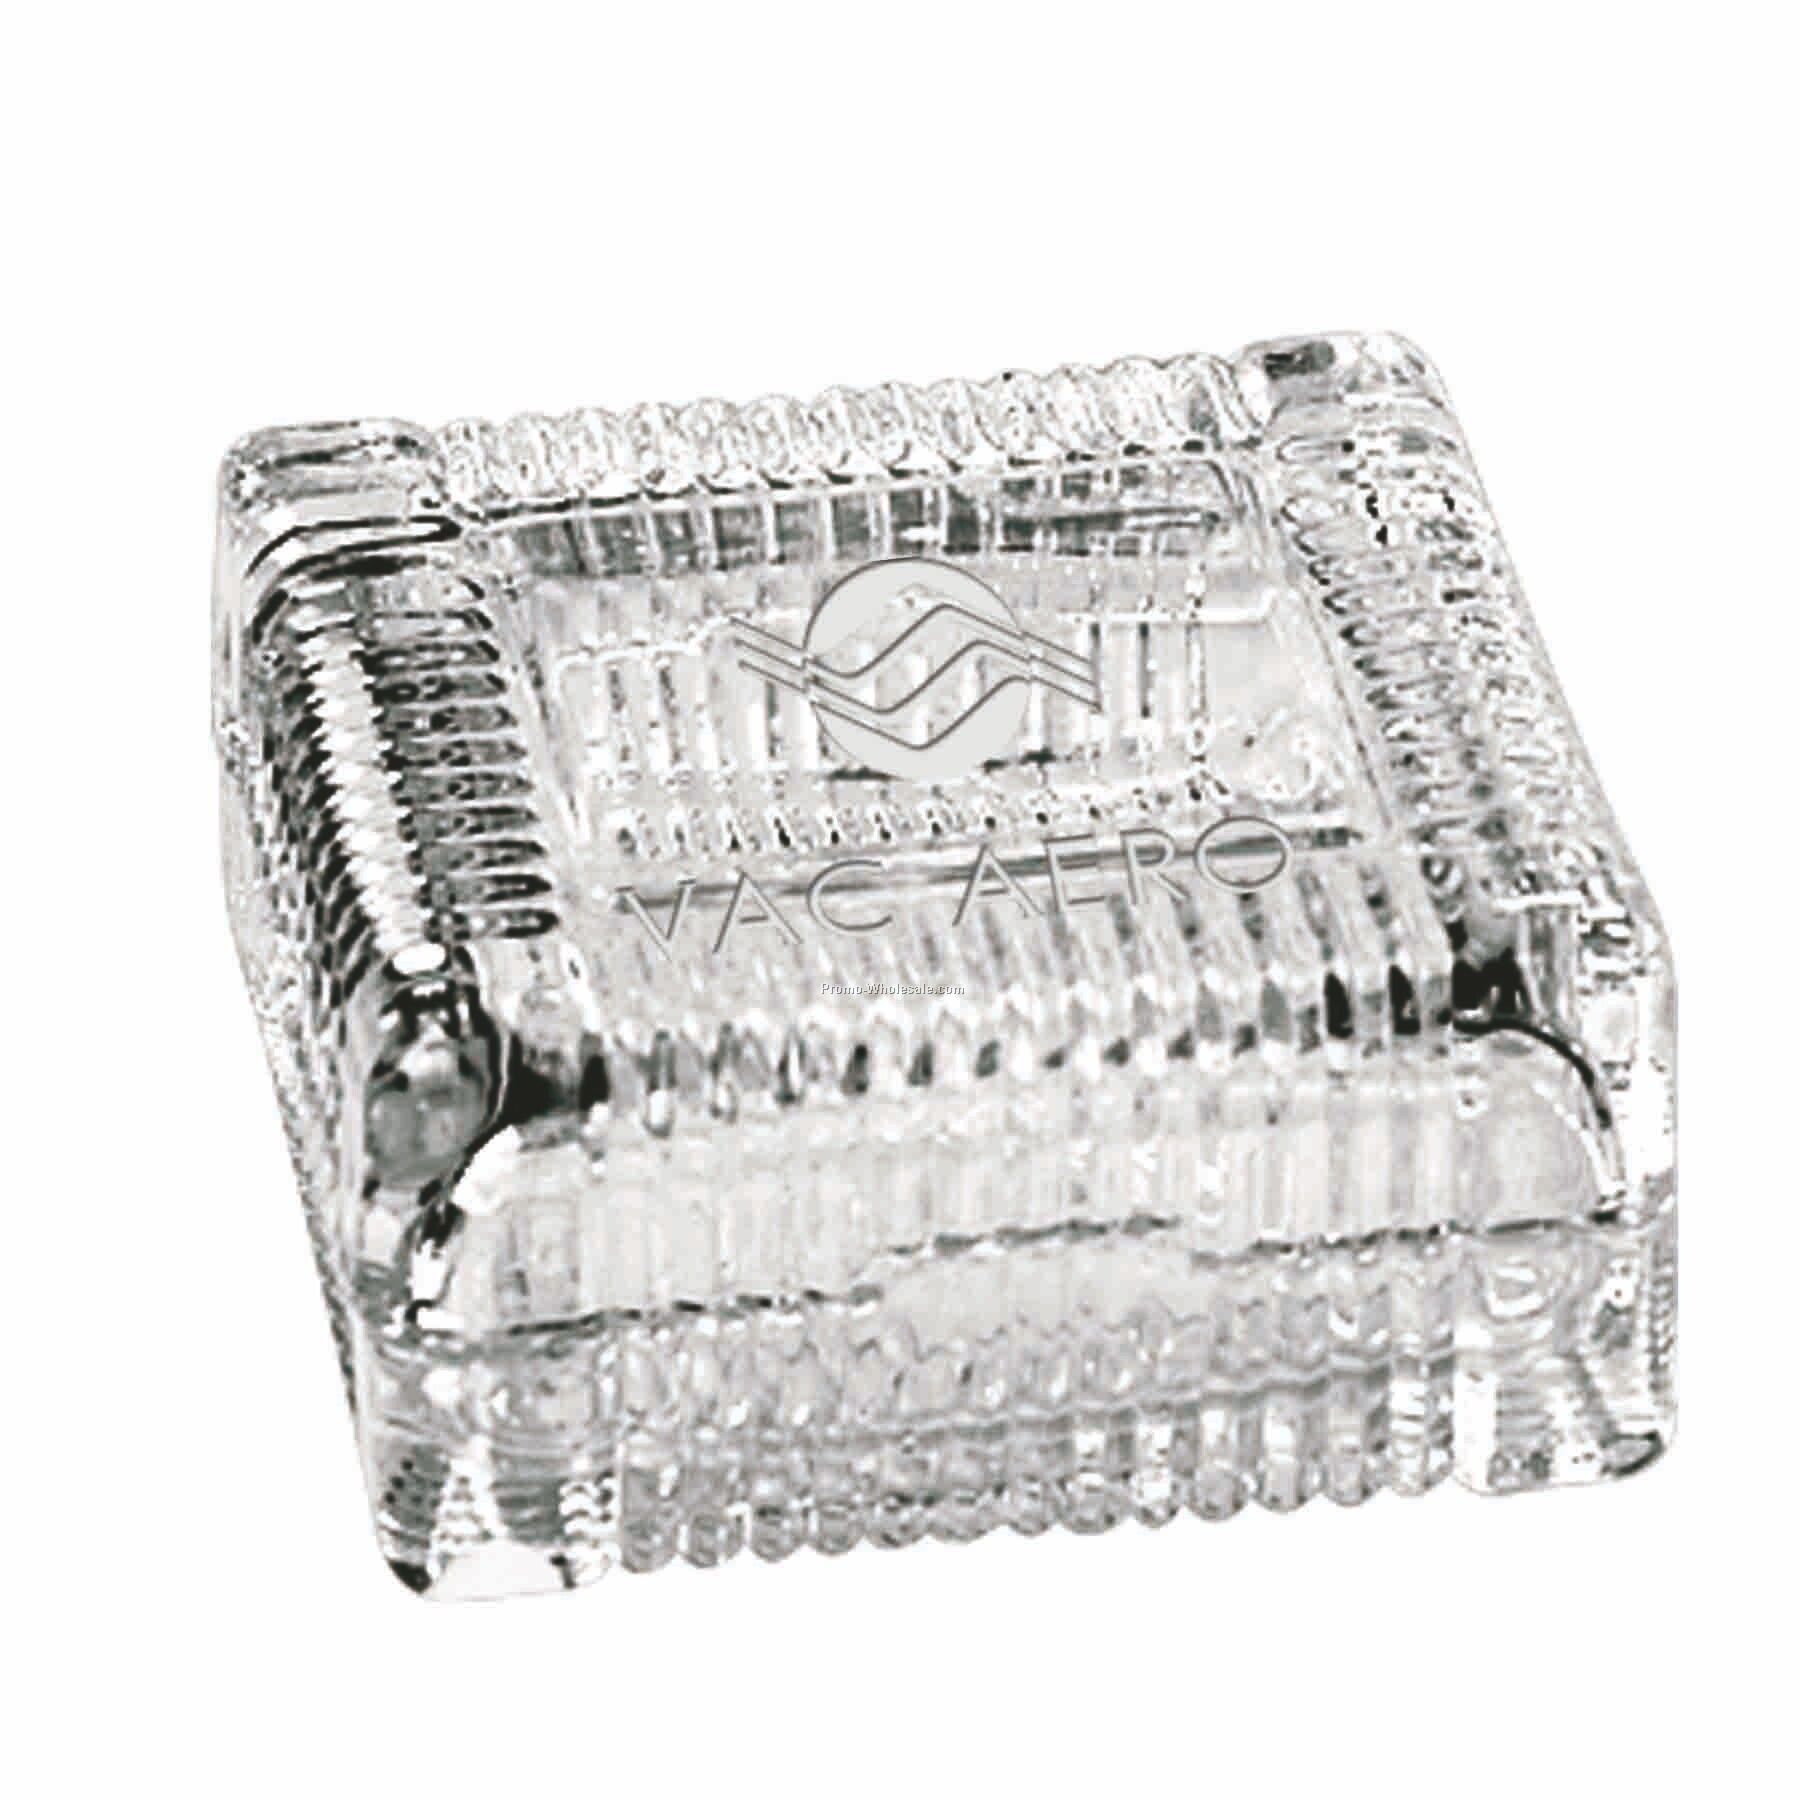 3-7/8"x3-7/8" Square Optical Crystal Candy Dish (Deep Etch)